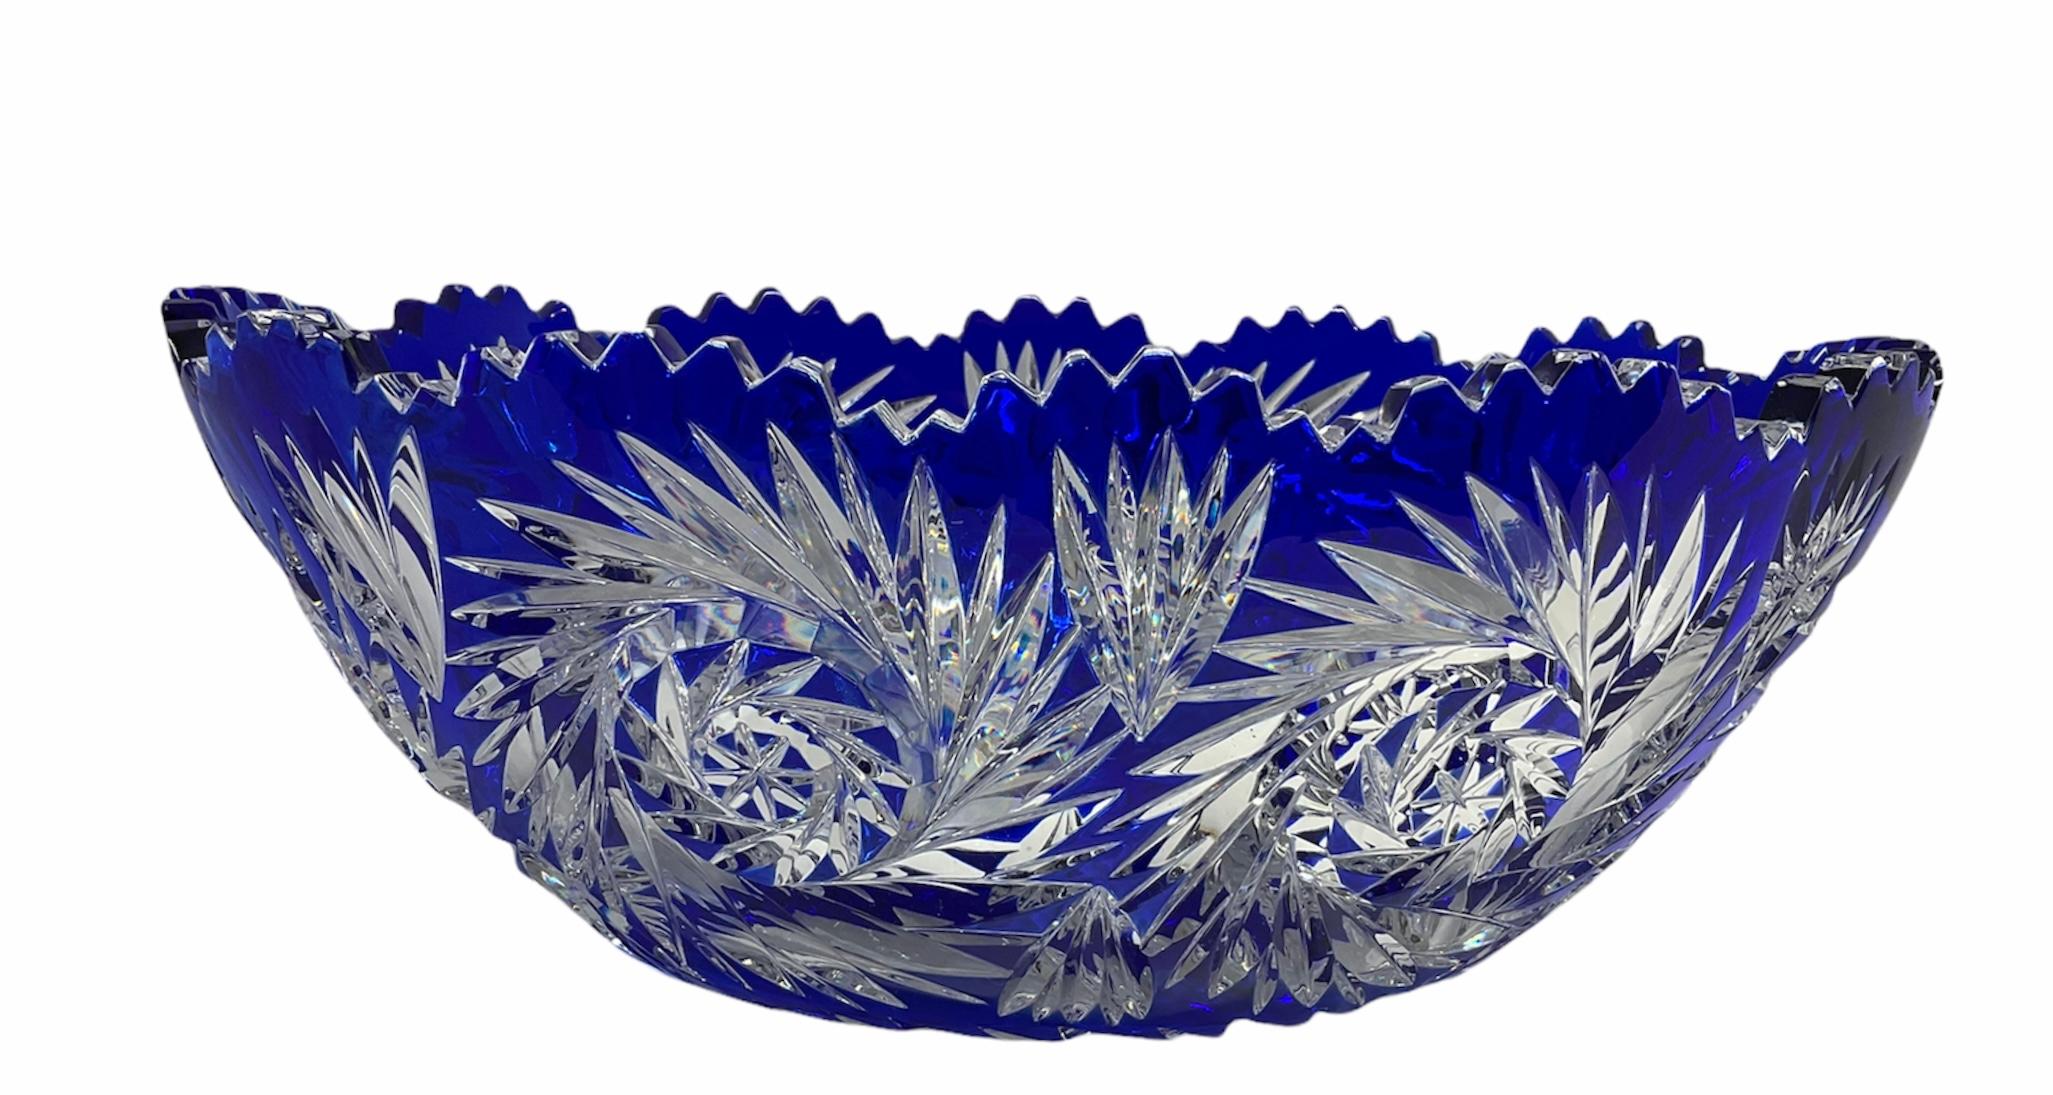 This is a Val Saint Lambert royal blue cut clear crystal large oval bowl. It is depicting one large buzz in the center and a pattern of more big buzzes alternated with fans around it. Its rim is scalloped.